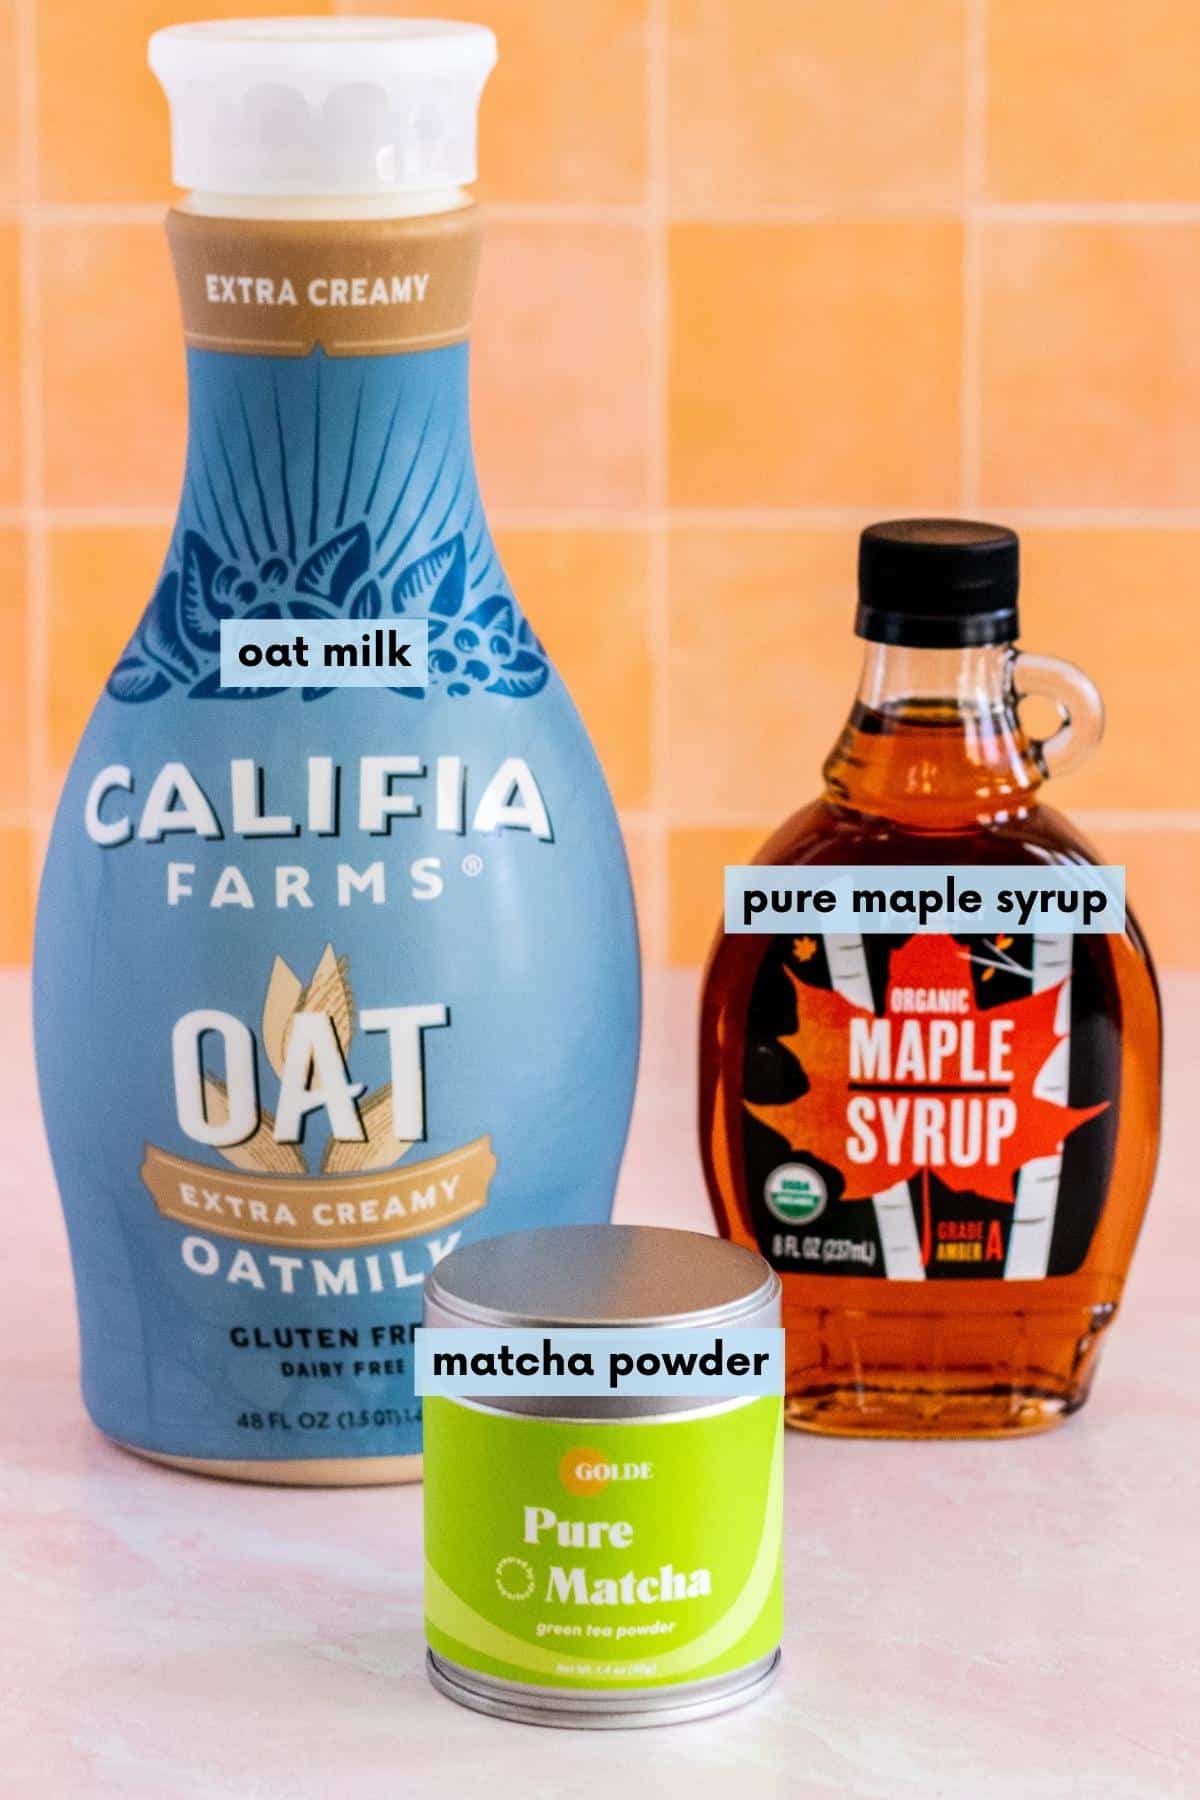 Tin of matcha powder, bottle of oat milk, and bottle of pure maple syrup.